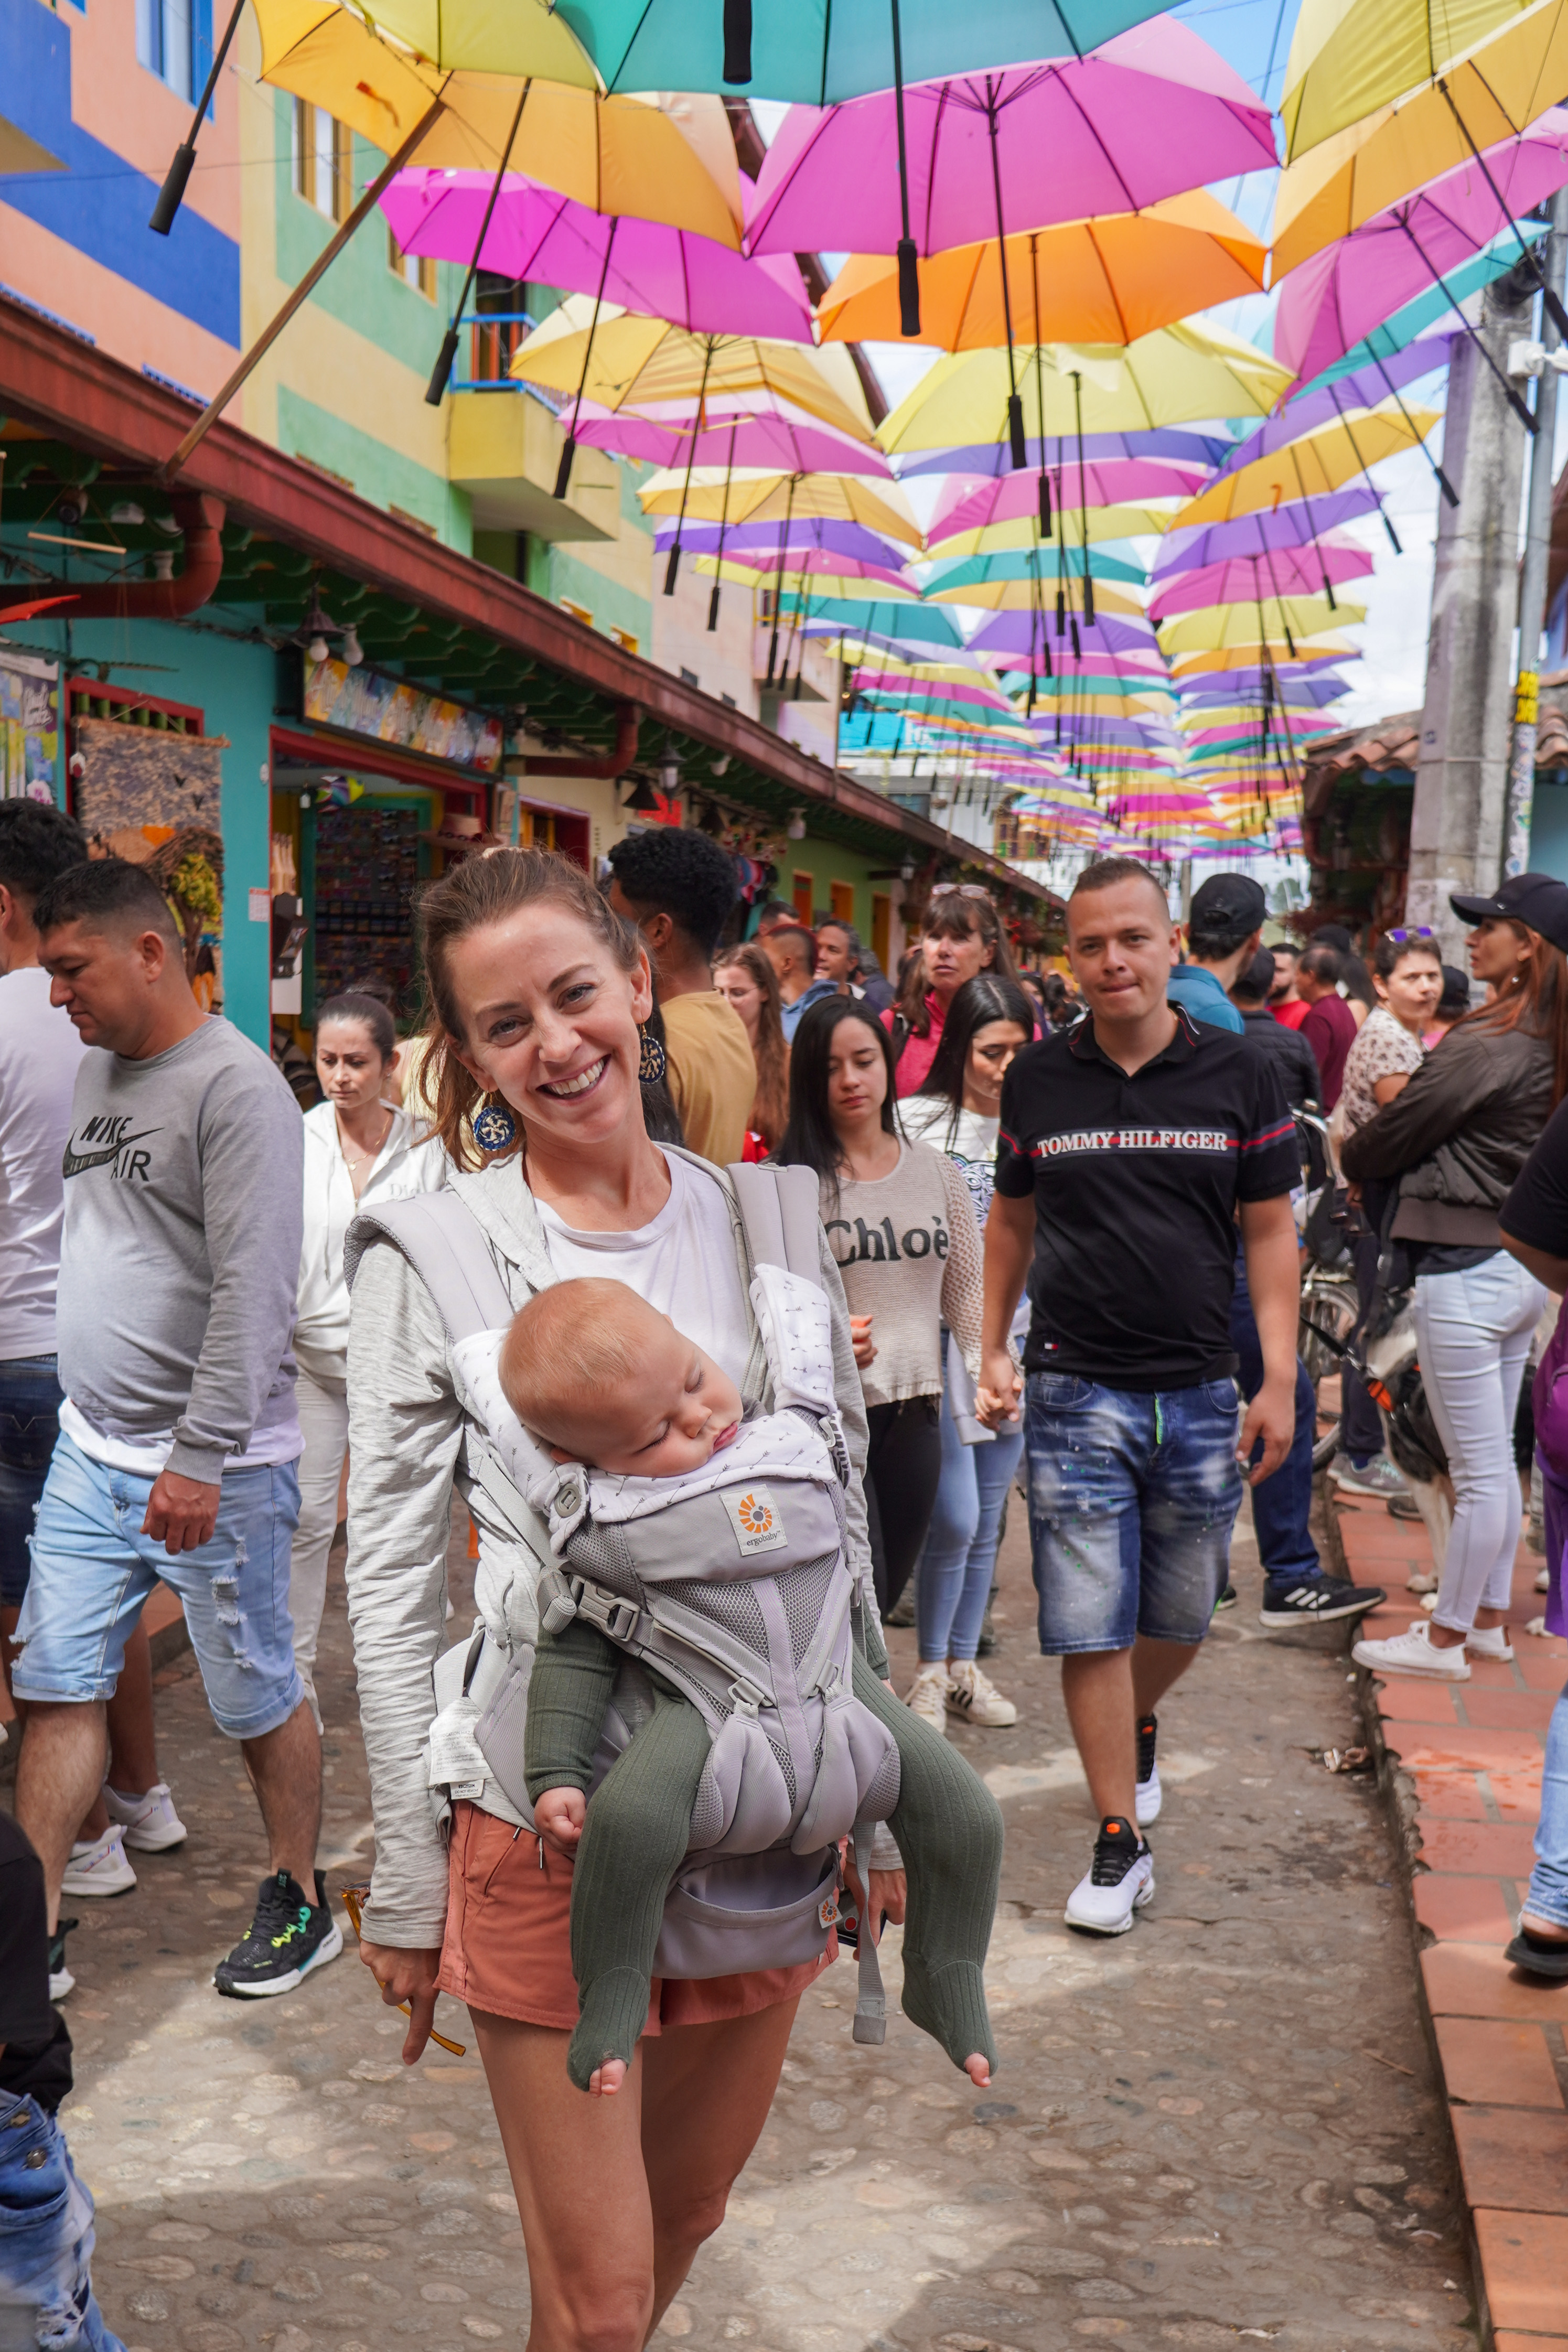 Stroll down the umbrella street in Guatape after visiting El Penol Rock during your Colombia 3 week itinerary.